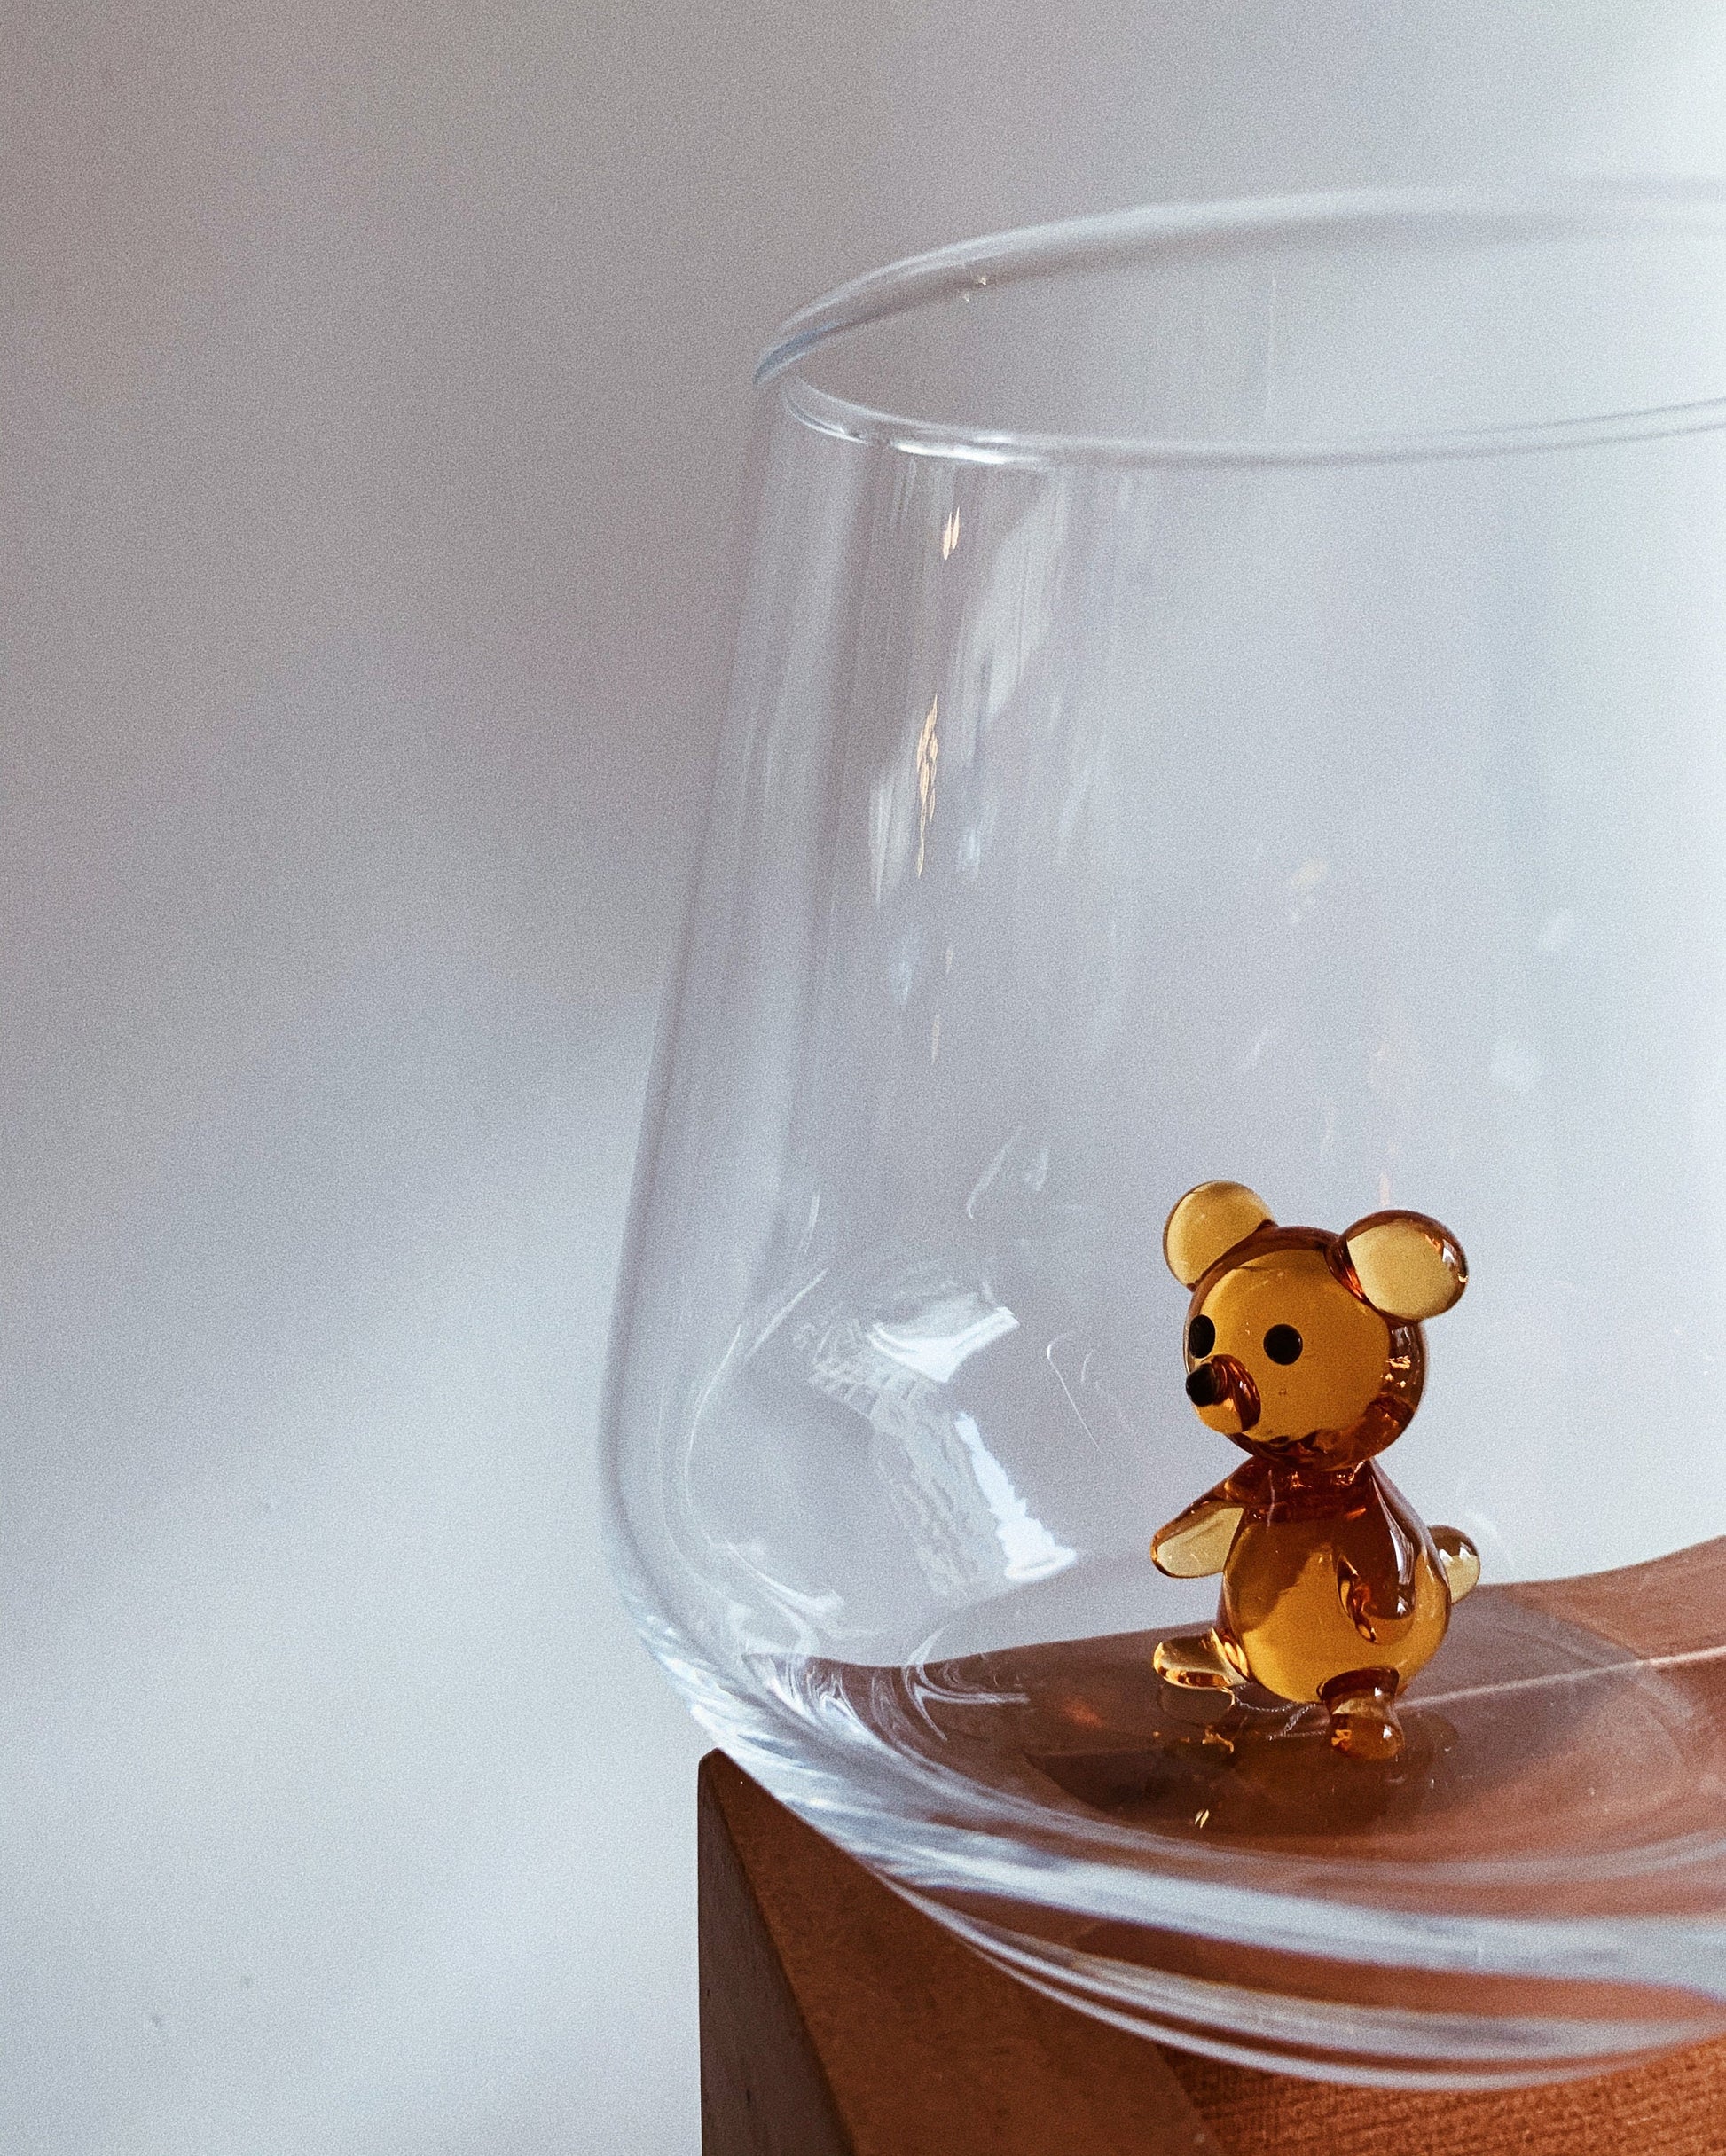 Aesthetic Glass Teddy Bear Tumbler with Lid and Straw